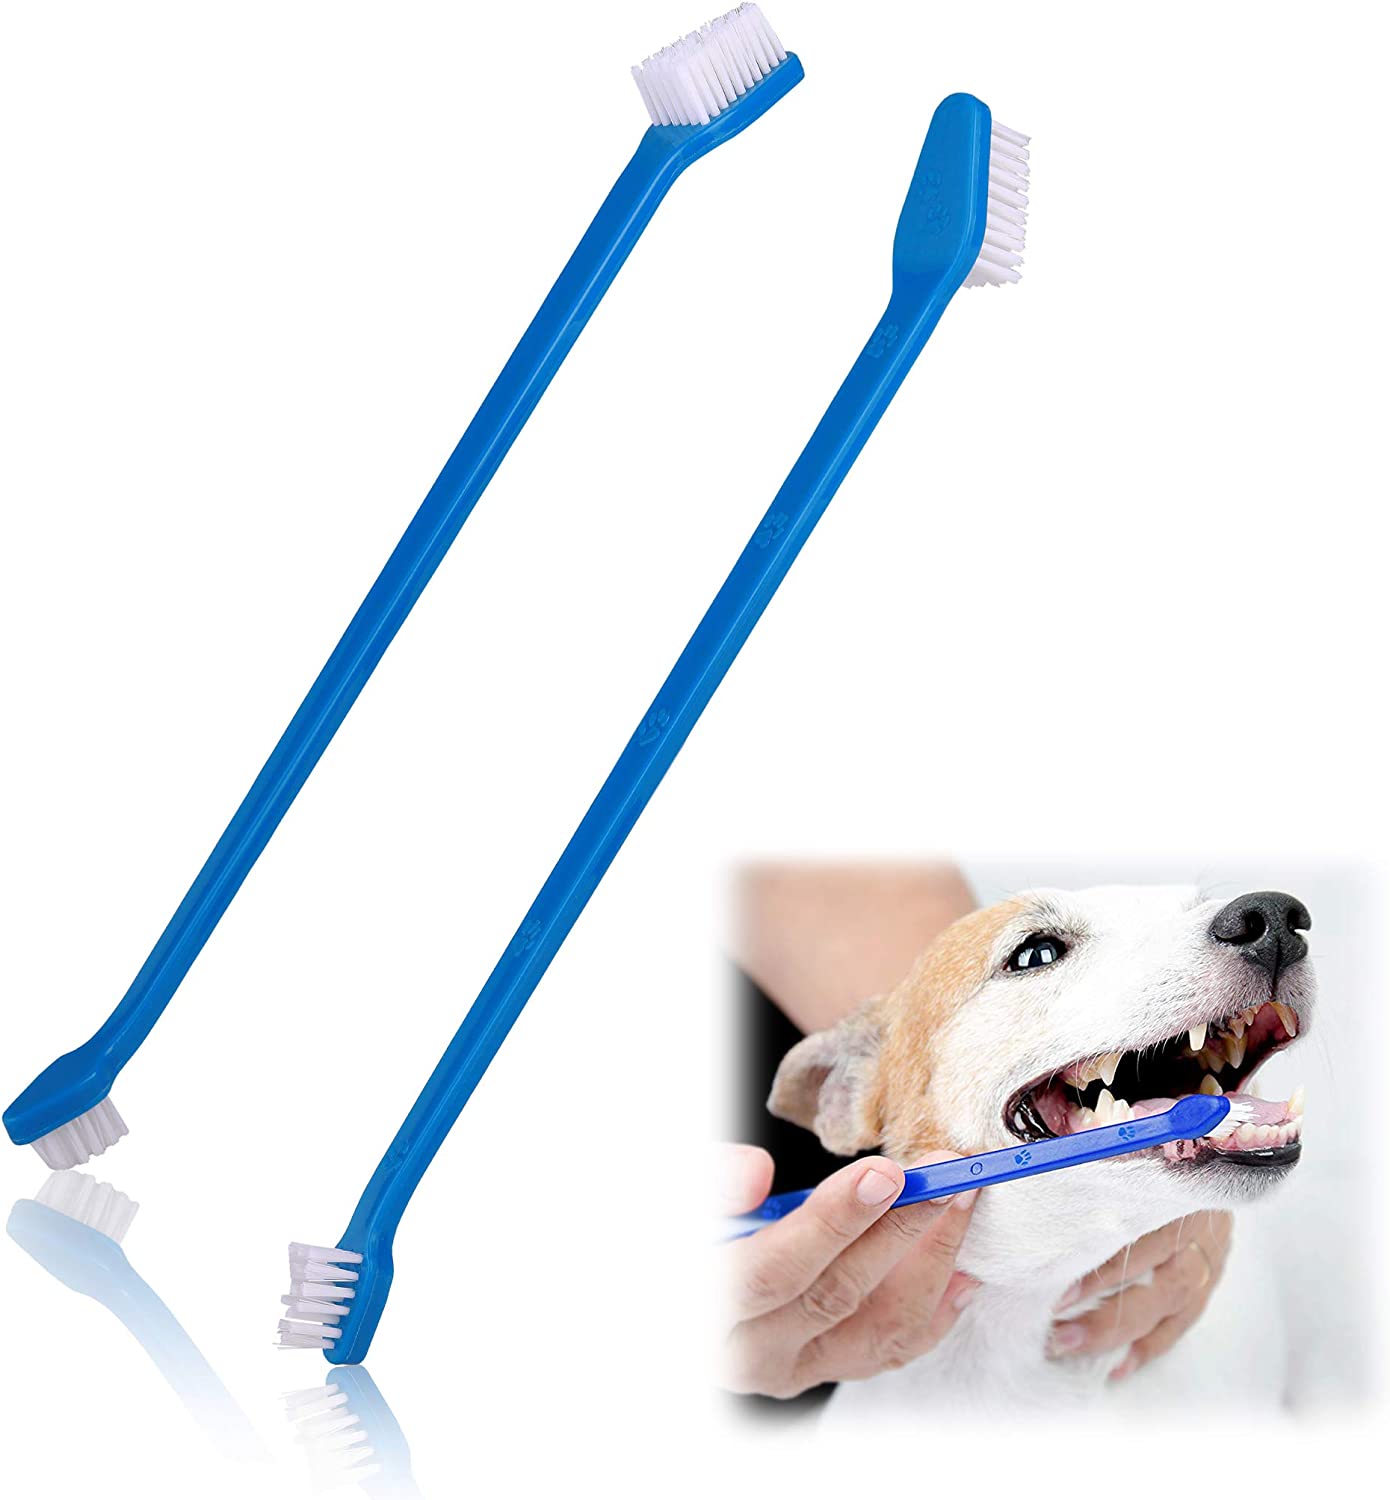 Pet Dental Care Toothbrush for Dogs and Cats